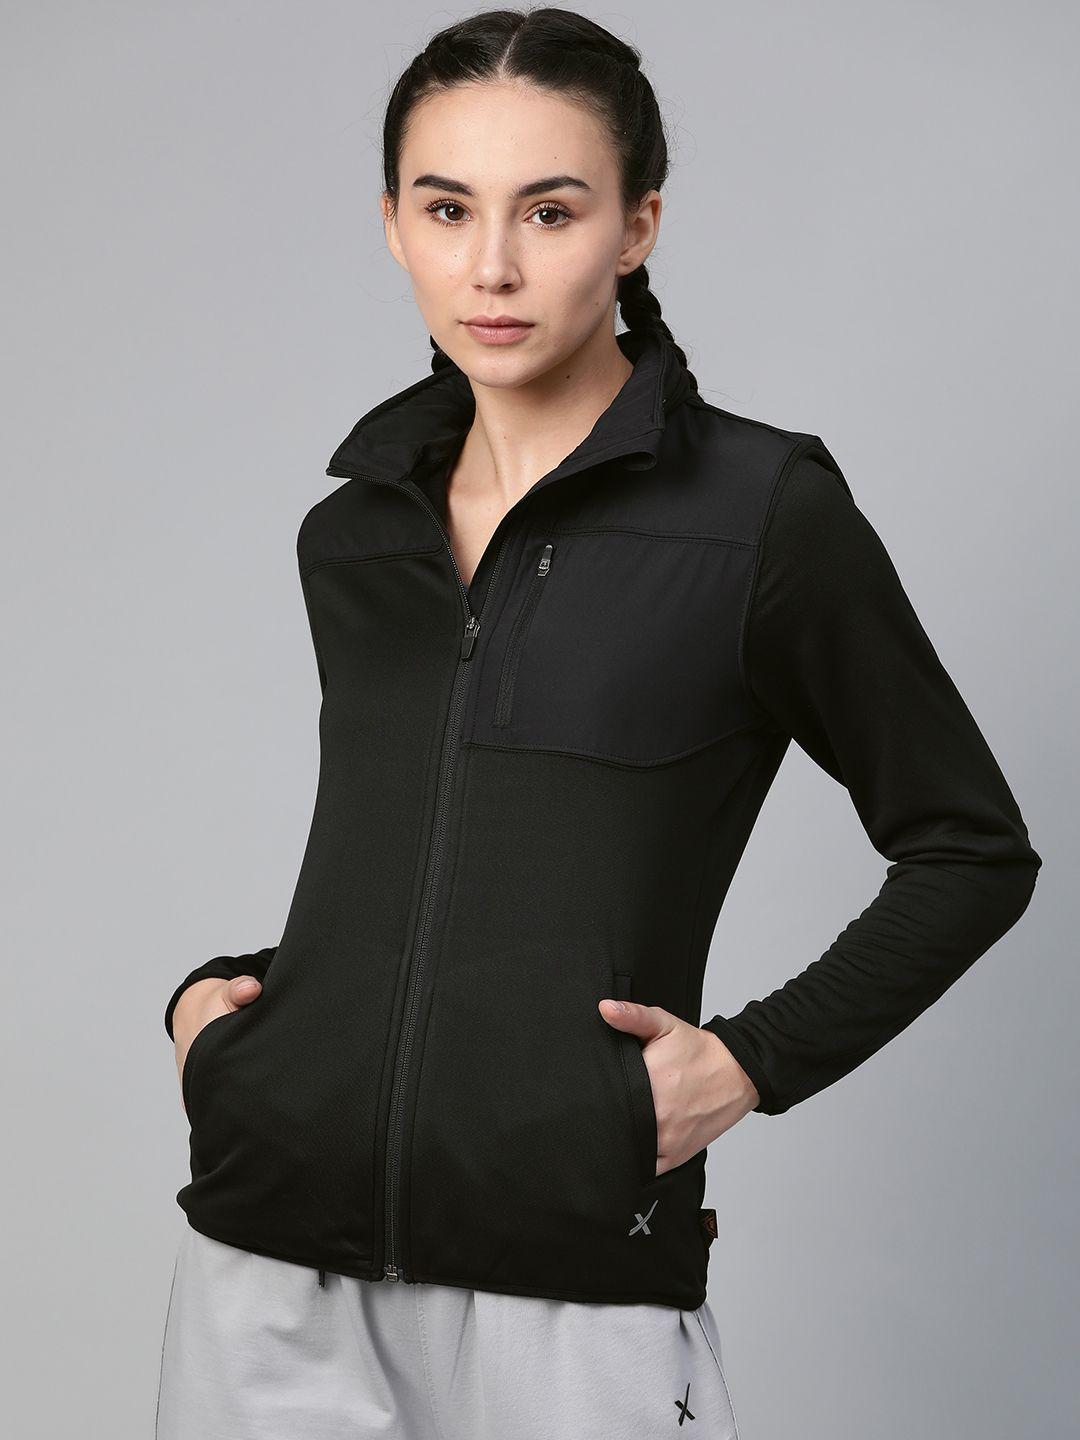 hrx by hrithik roshan women blk solid rapid-dry antimicrobial outdoor jacket